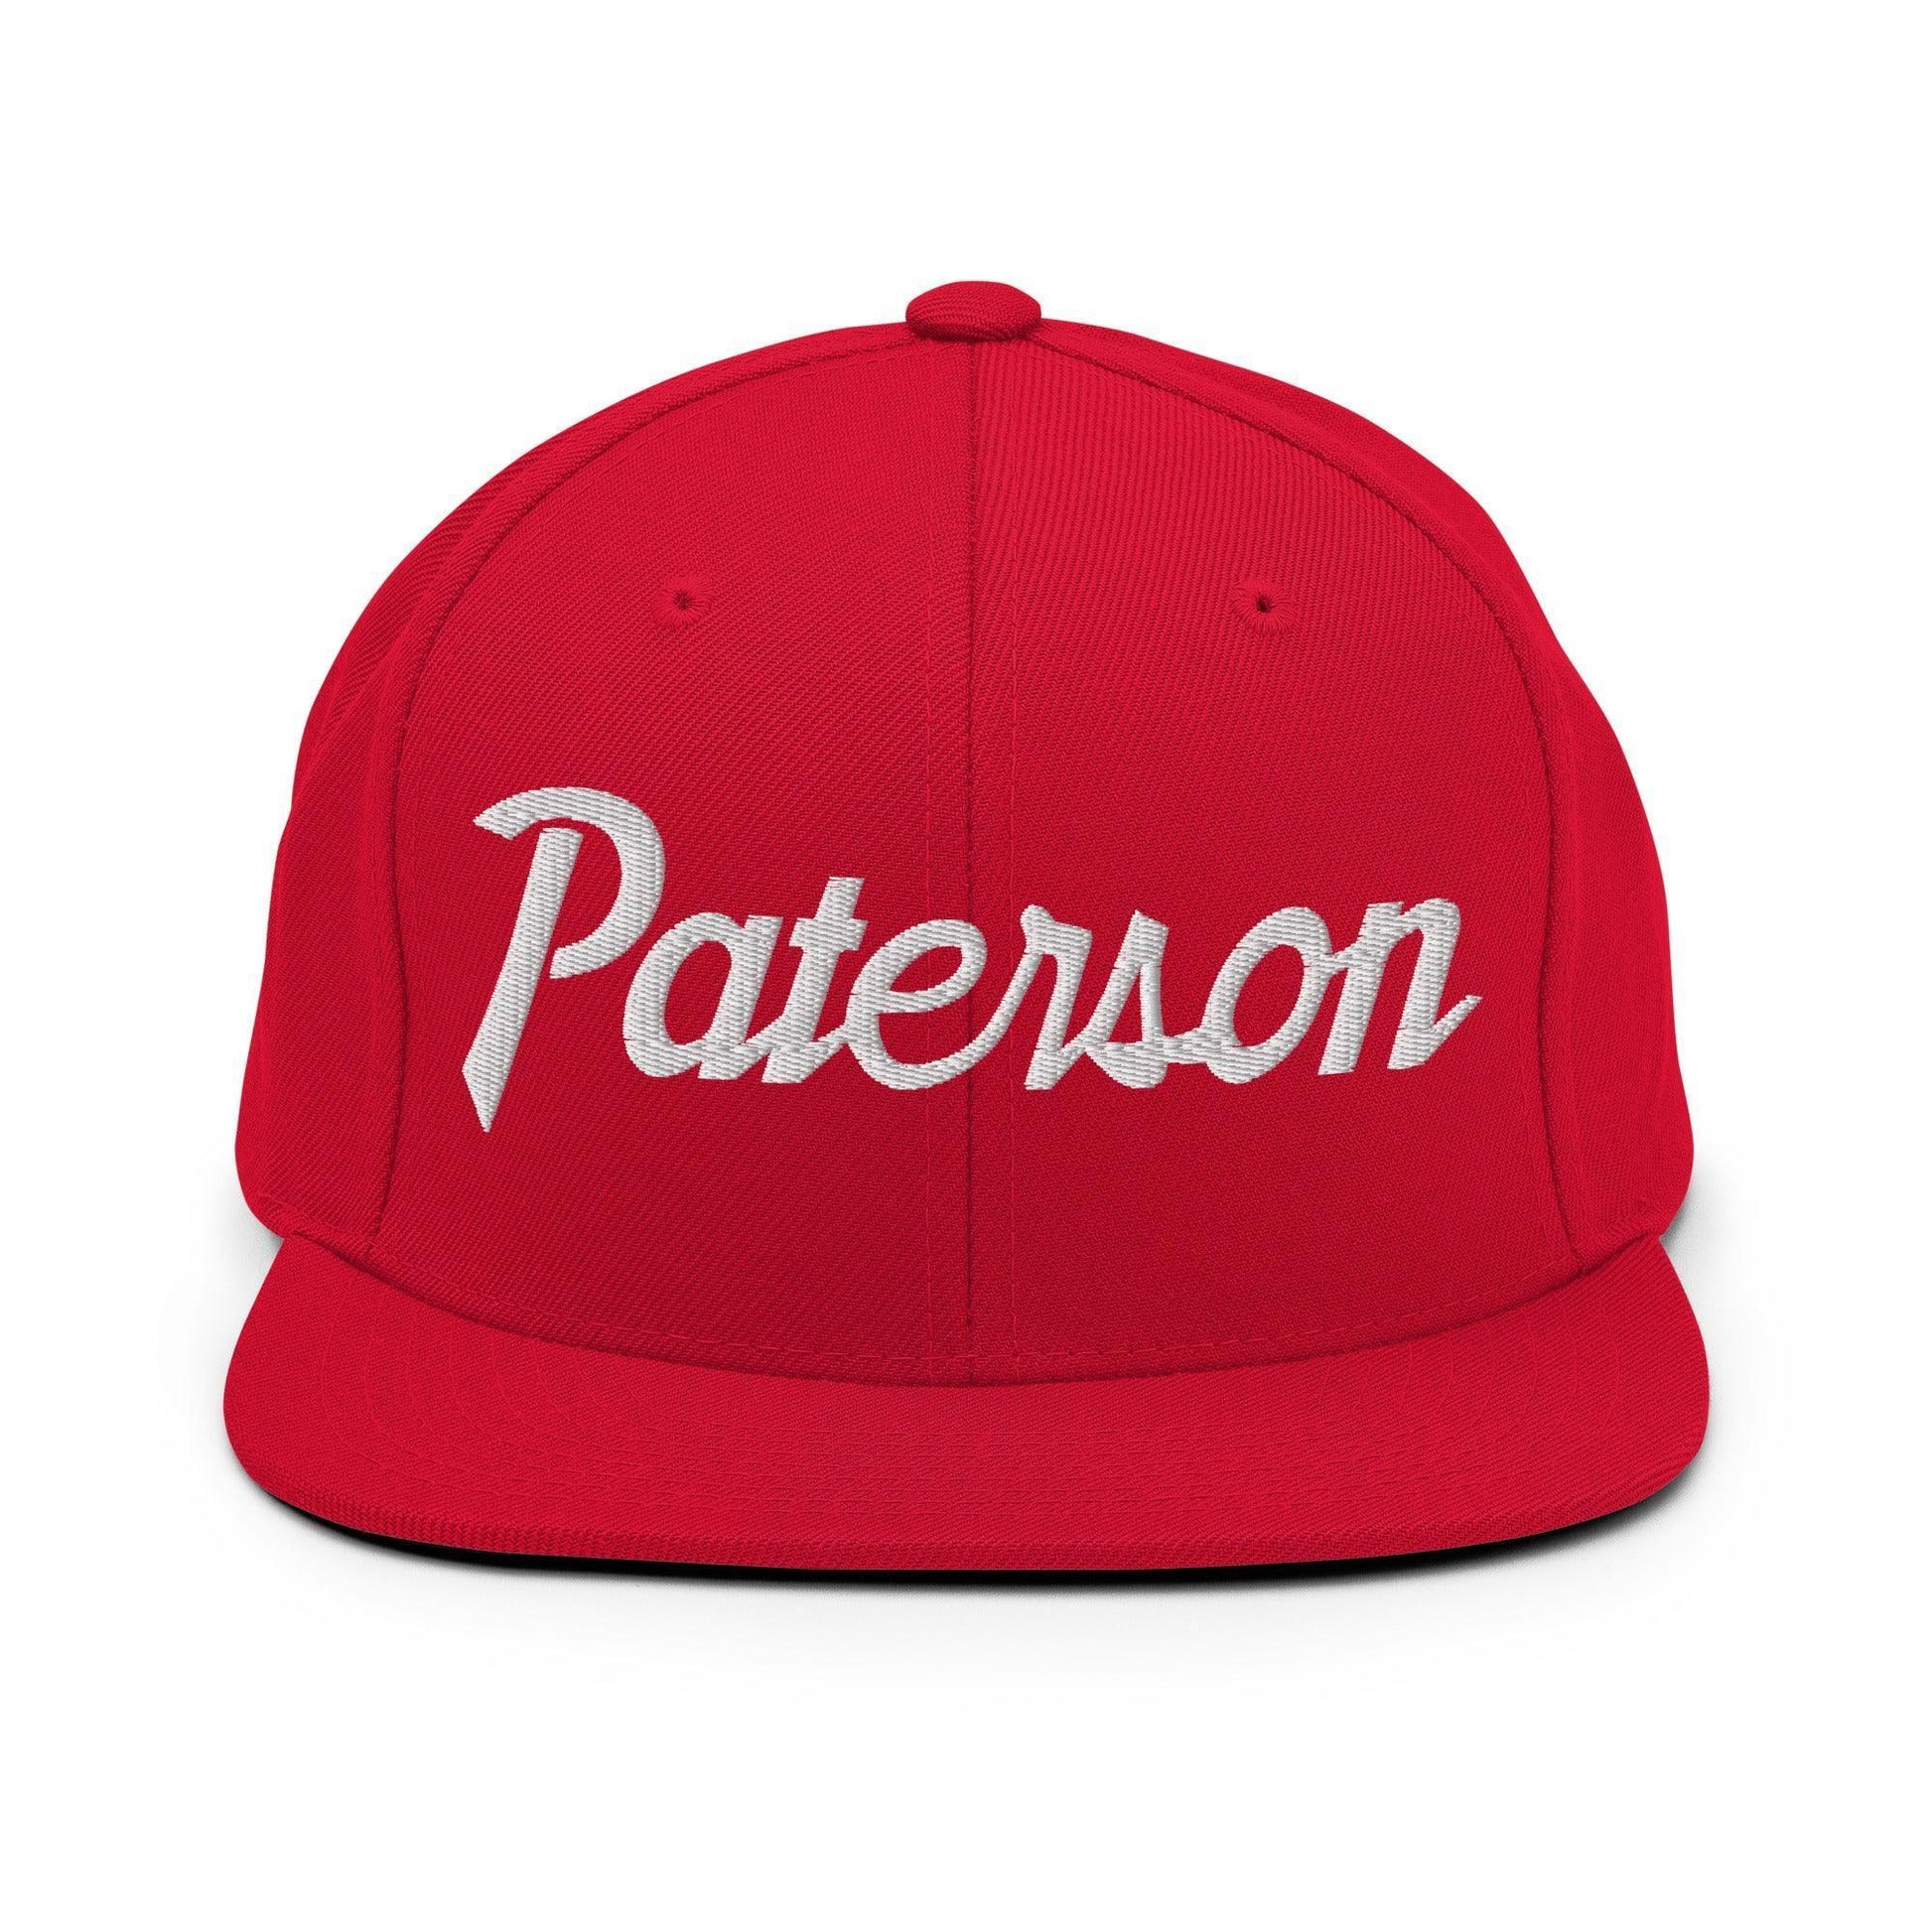 Paterson Script Snapback Hat Red